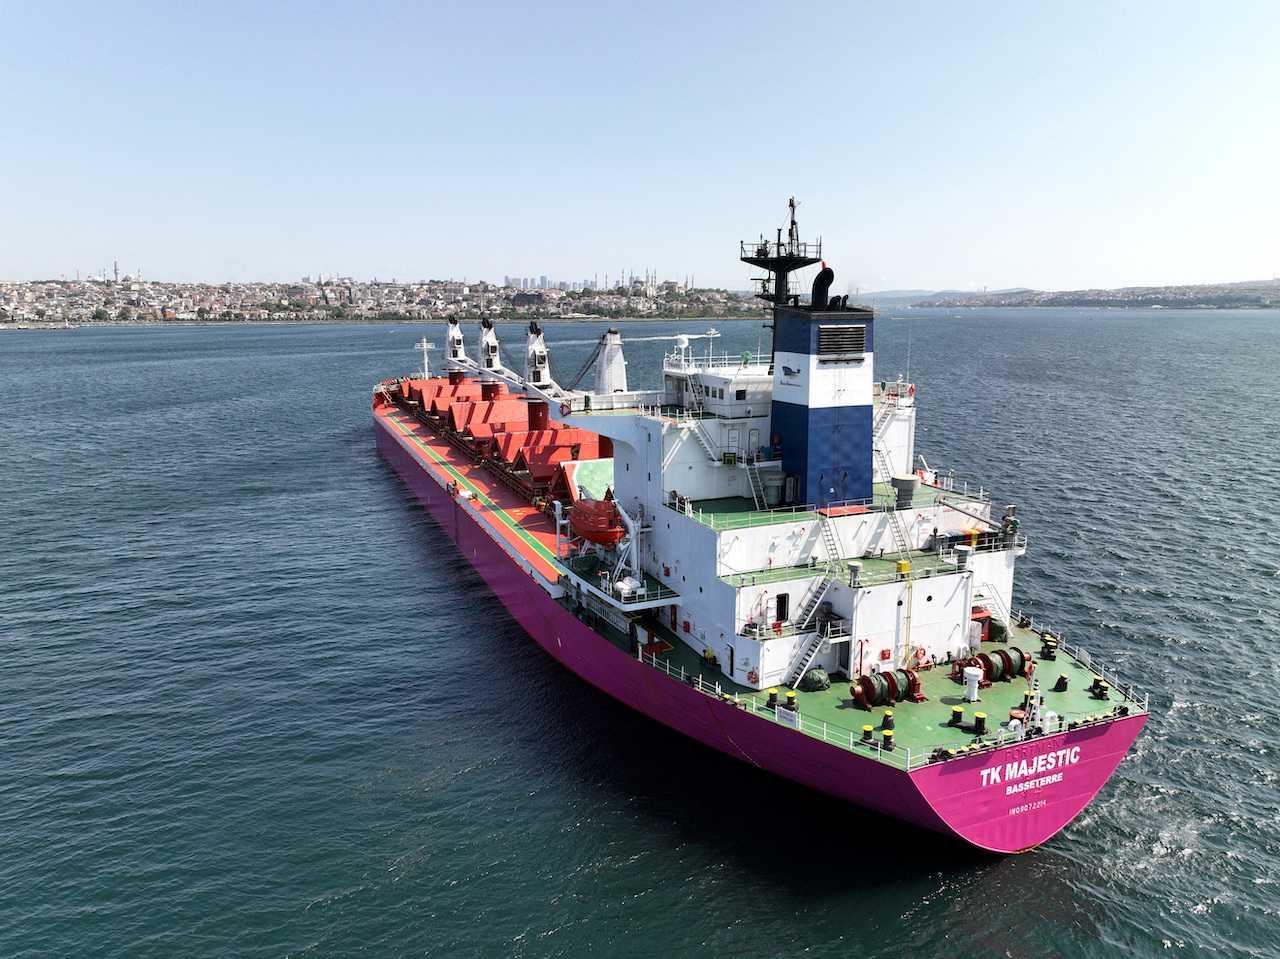 Saint-Kitts-and-Nevis-flagged bulker TK Majestic, carrying grain under the UN's Black Sea grain initiative, waits in the southern anchorage of the Bosphorus in Istanbul, Turkey, July 15. Photo: Reuters